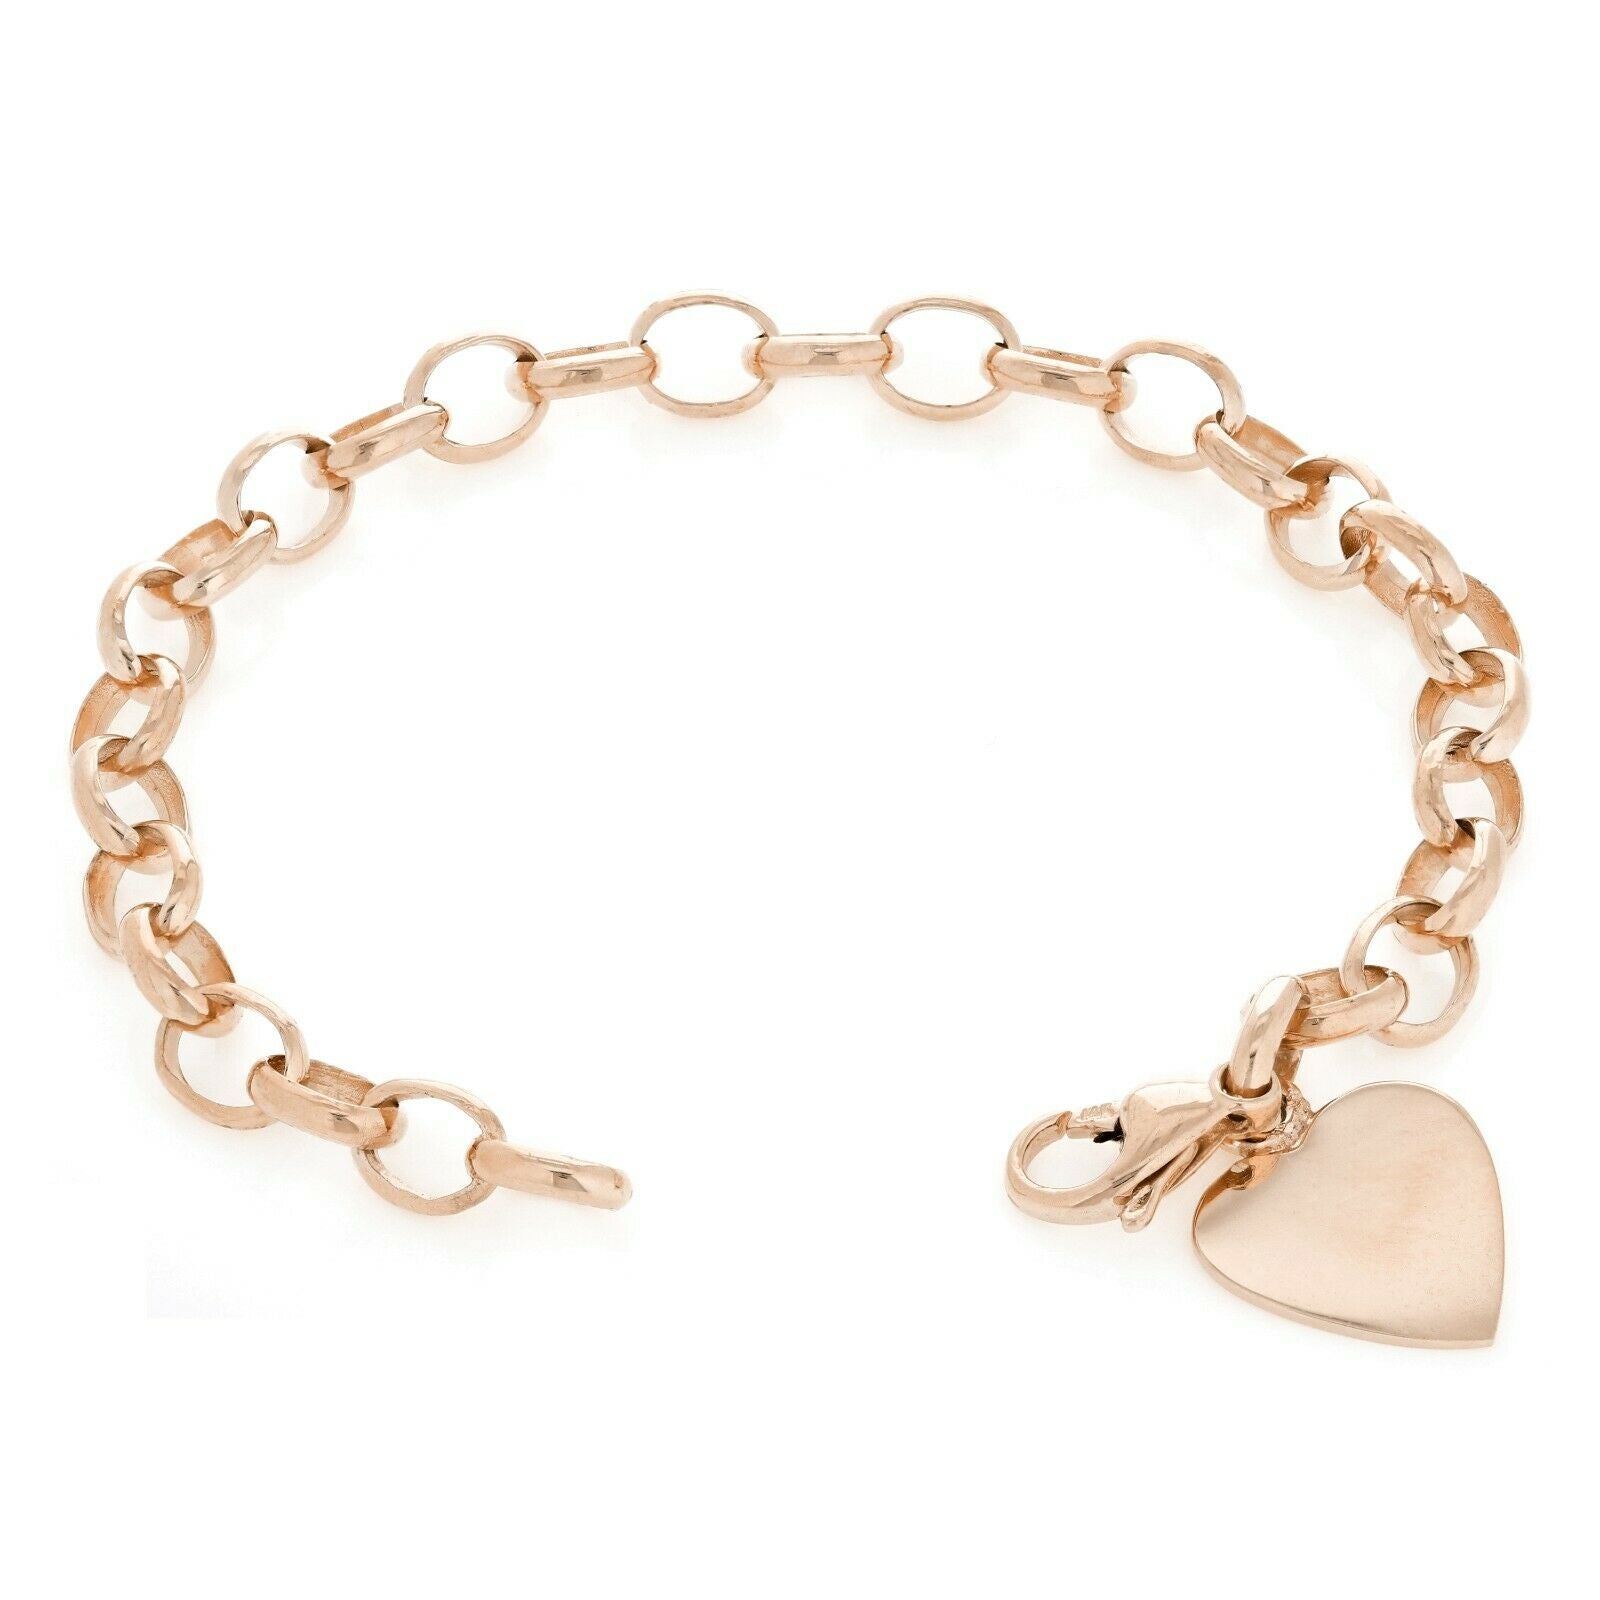 Buy the Vintage 14K Yellow Gold Heart Charm Bracelet 27.1g | GoodwillFinds